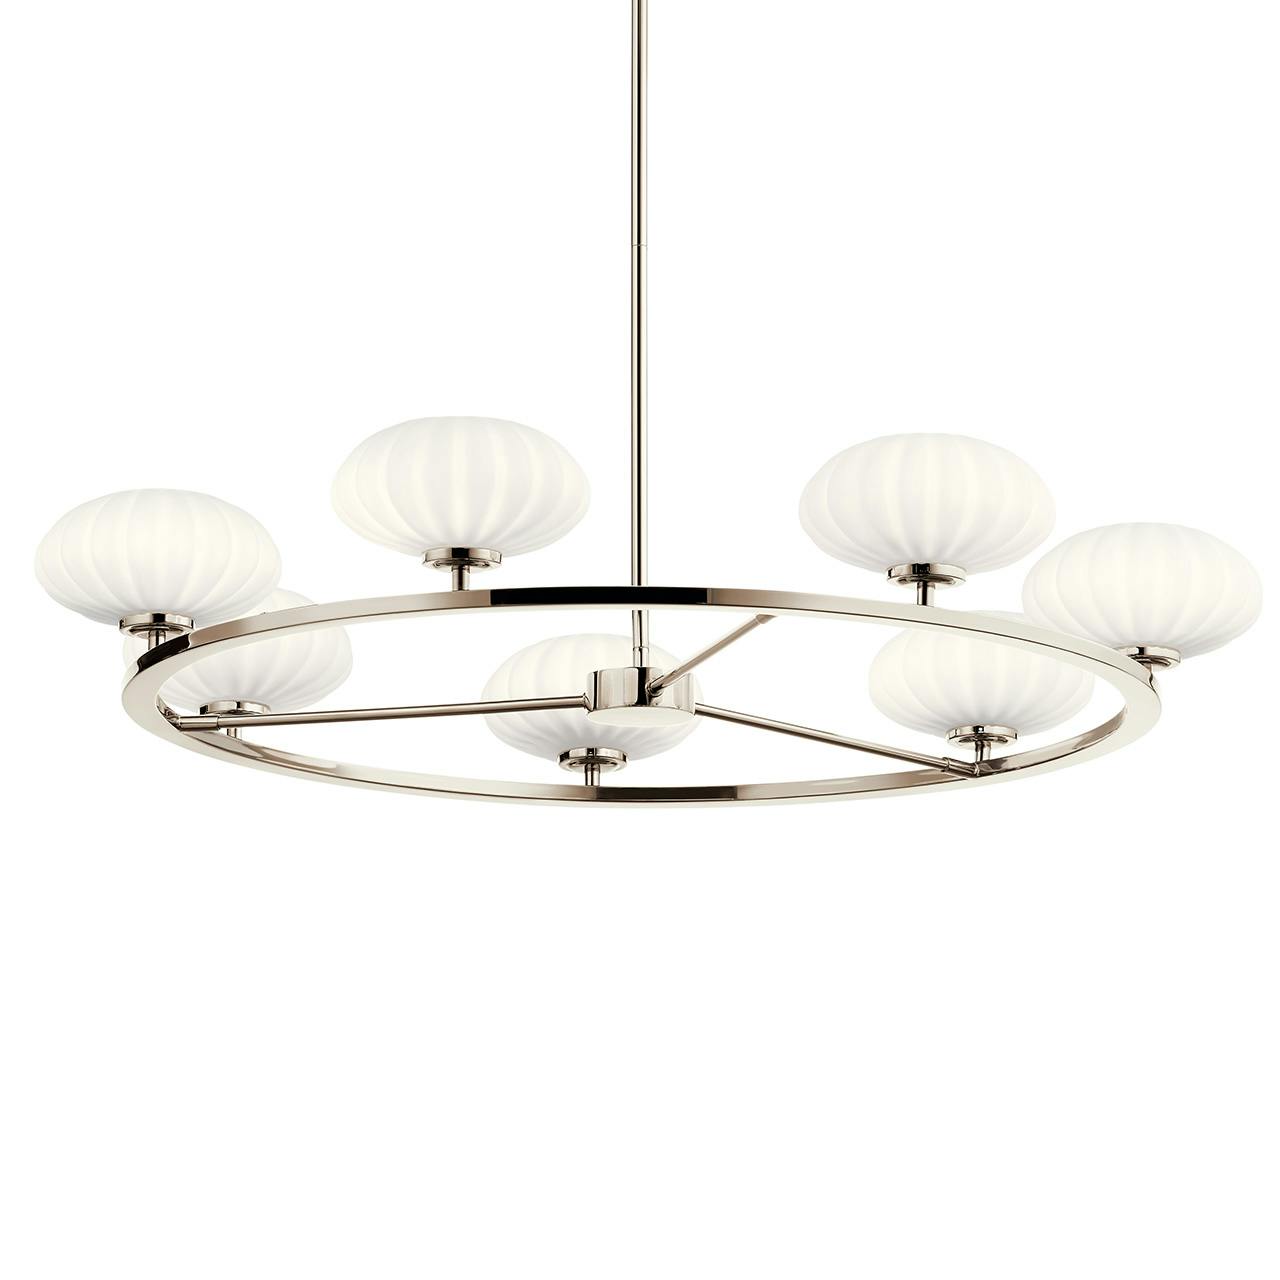 Pim 40" 7 Light Round Chandelier Nickel without the canopy on a white background